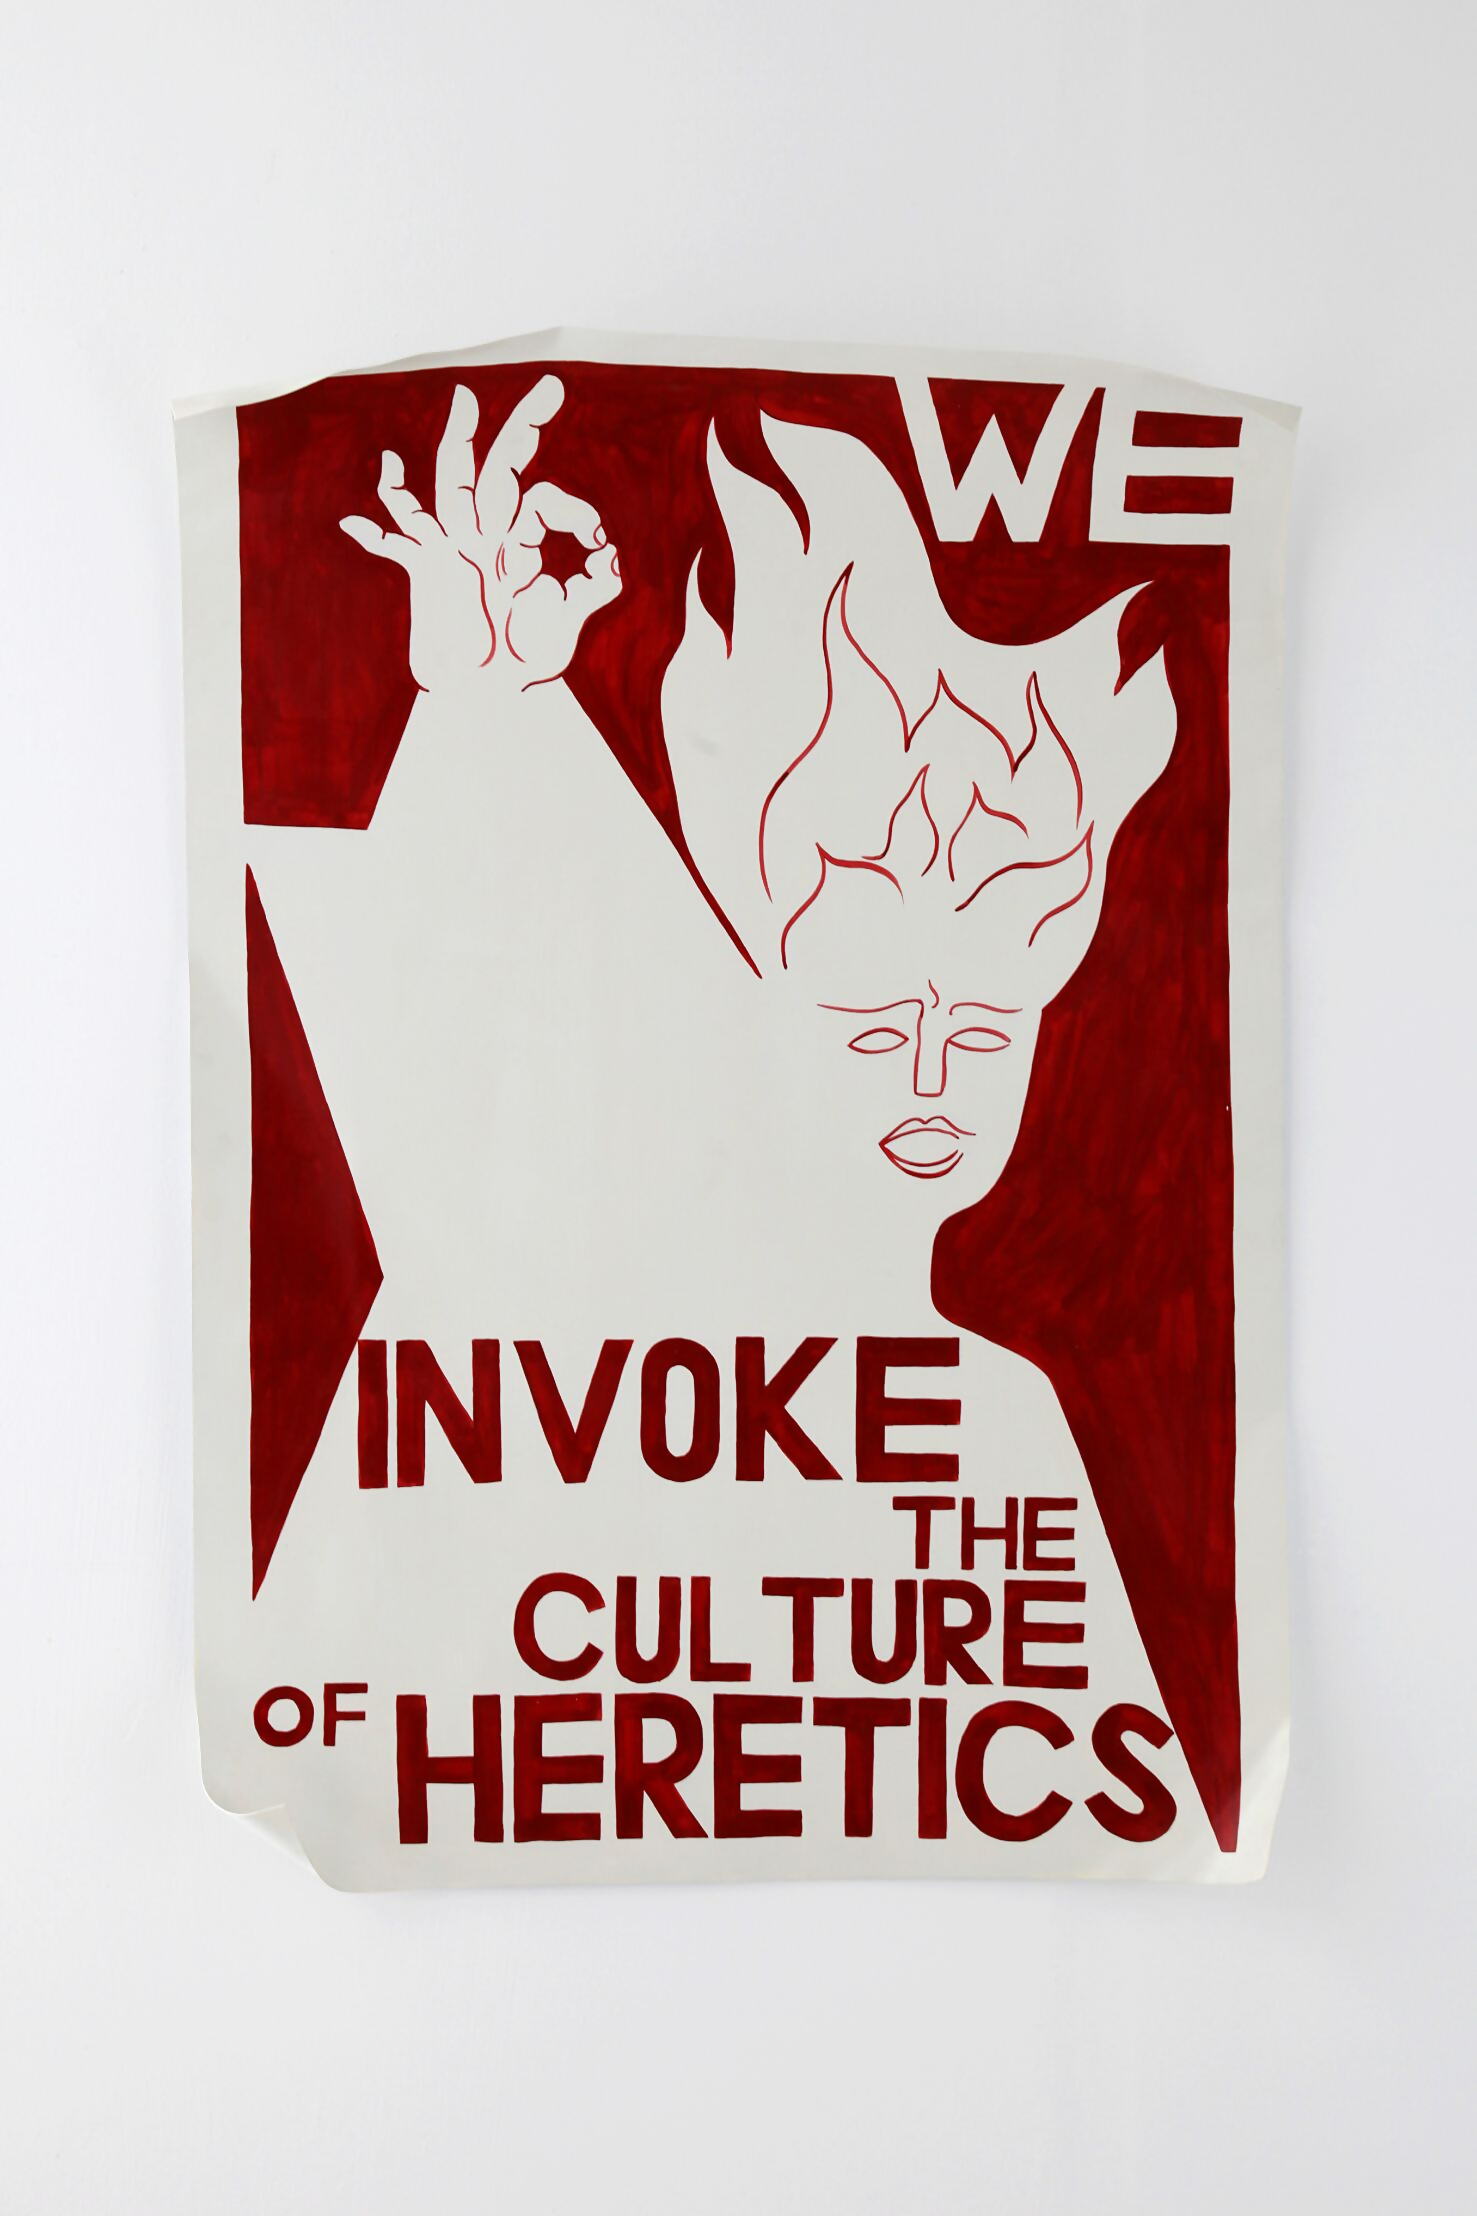 13 Anna Bunting - Branch, W.I.T.C.H. (“We Invoke the Culture of Heretics”) , 2015 . © Anna Bunting - Branch